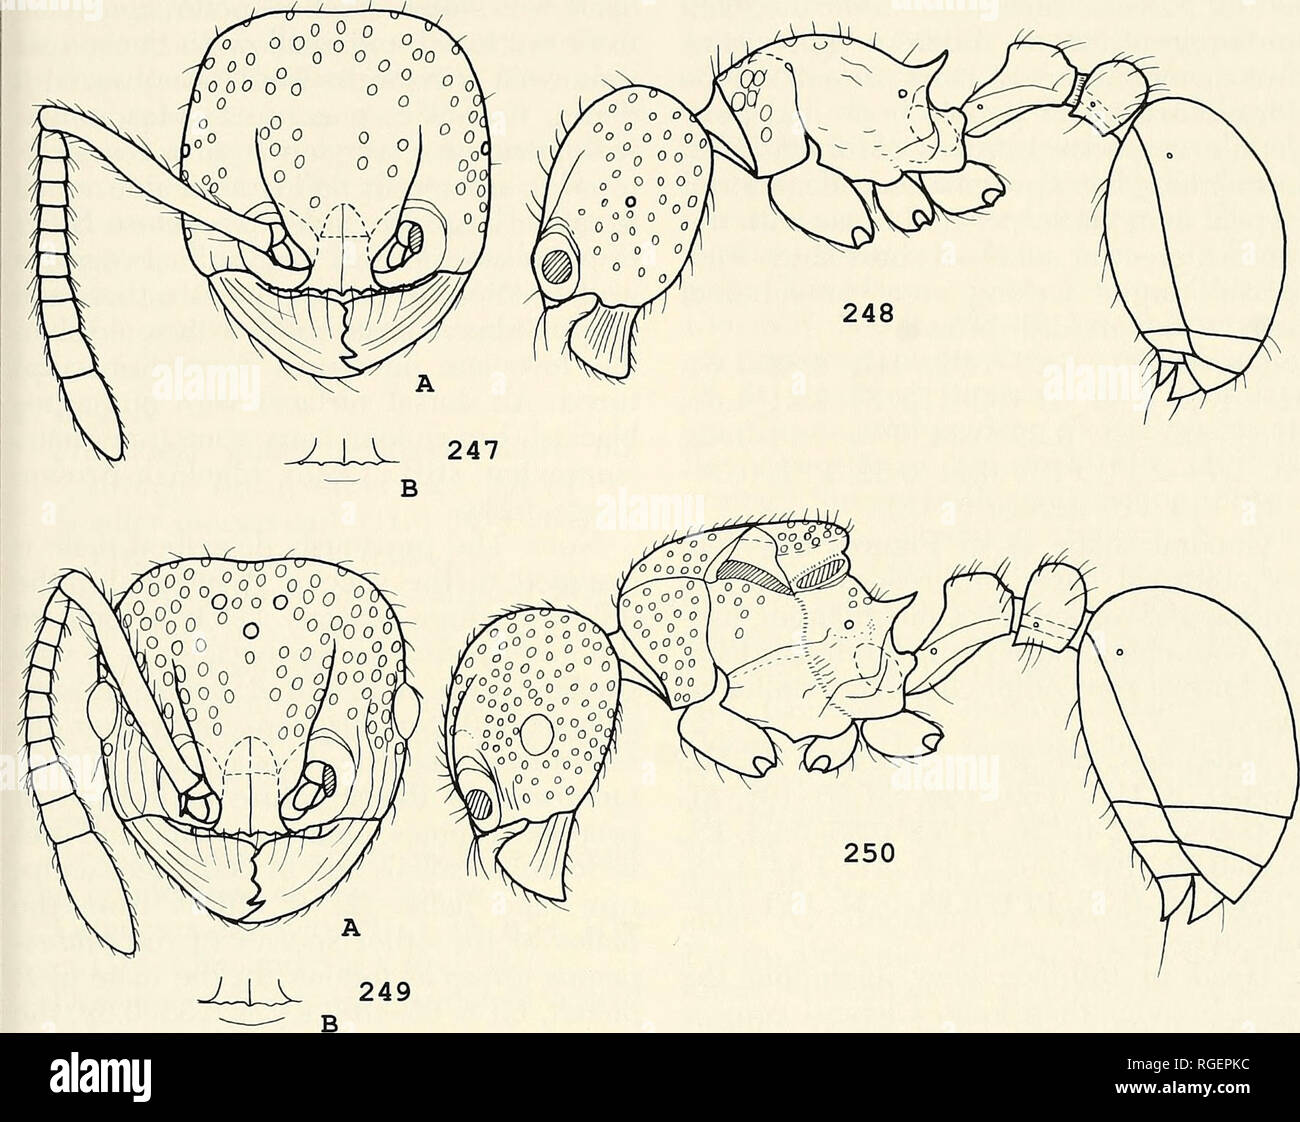 . Bulletin of the Museum of Comparative Zoology at Harvard College. Zoology. Revision of the Ant Genus Pristomyrmex ' Wang 519. Figures 247-250. Pristomyrmex picteti Emery. 247A: Worker head, full-face view; 247B: Showing a transverse carina on the ventral clypeus; 248: Worker, lateral view; 249A: Queen head, full-face view; 249B: Showing a long transverse carina on the ventral clypeus; 250: Queen, lateral view. with a broad and deep notch on the center of the dorsal surface, but in several spec- imens (from Palawan I., Philippines), this lamella is entire, without a notch. Eyes very small, us Stock Photo